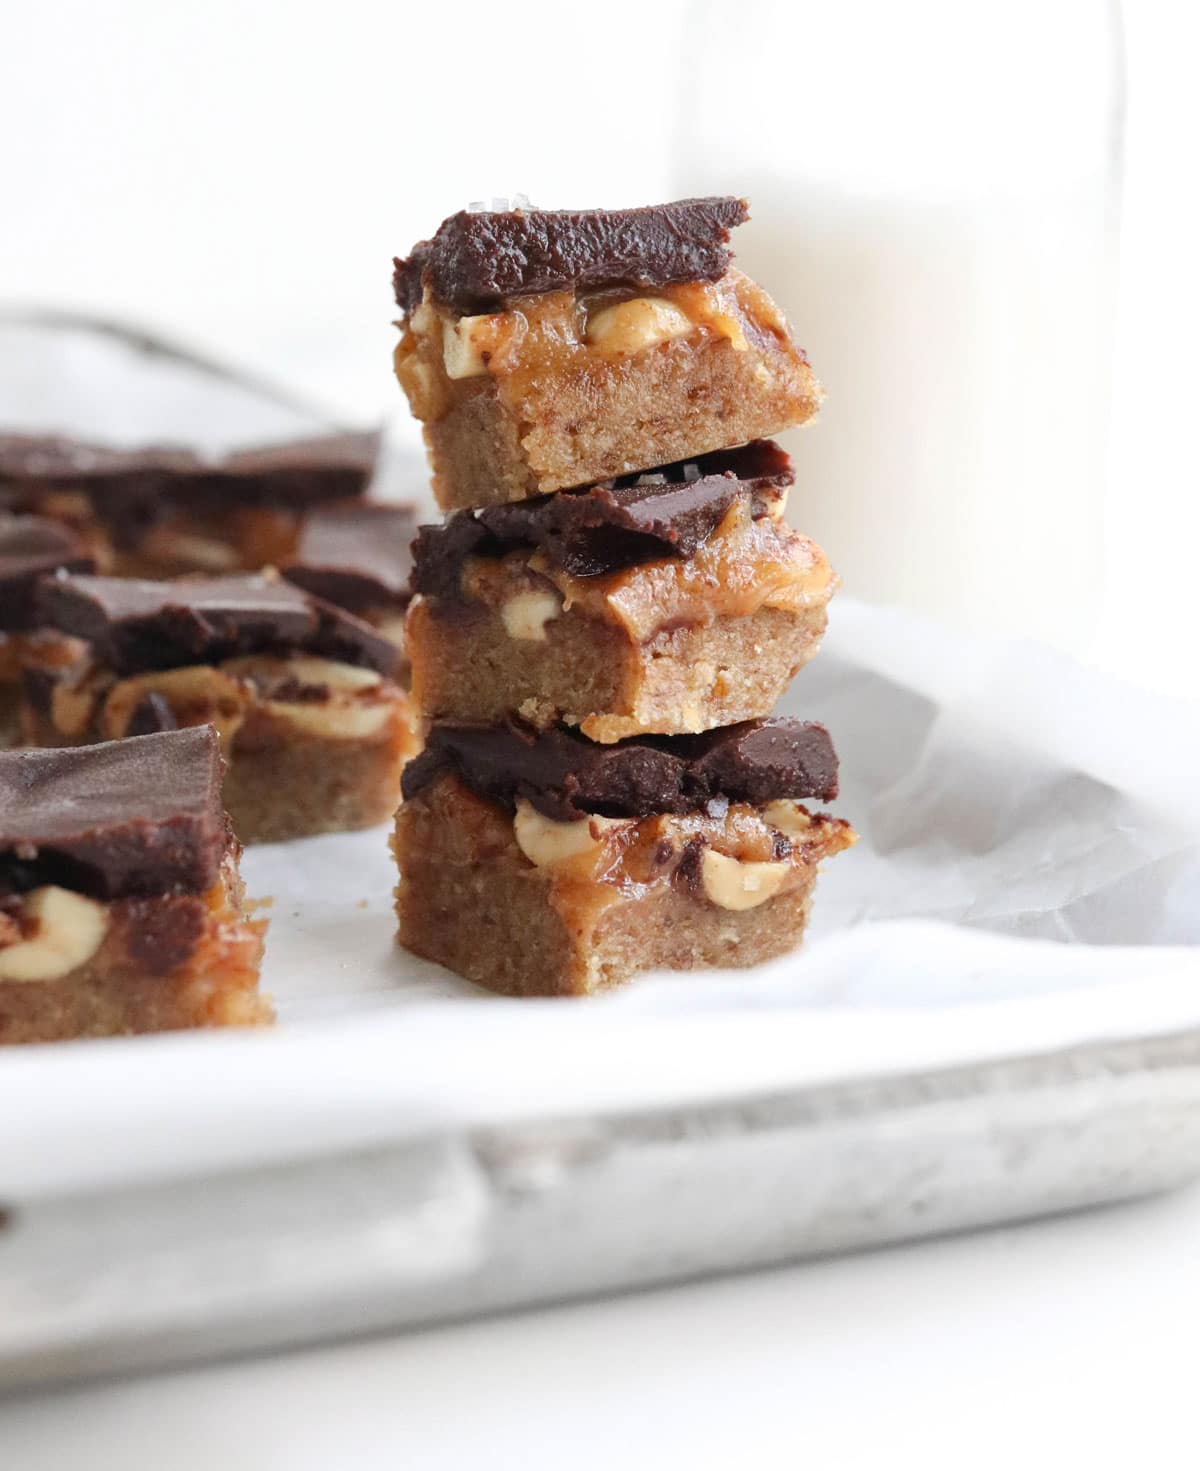 homemade snickers bars stacked on a pan